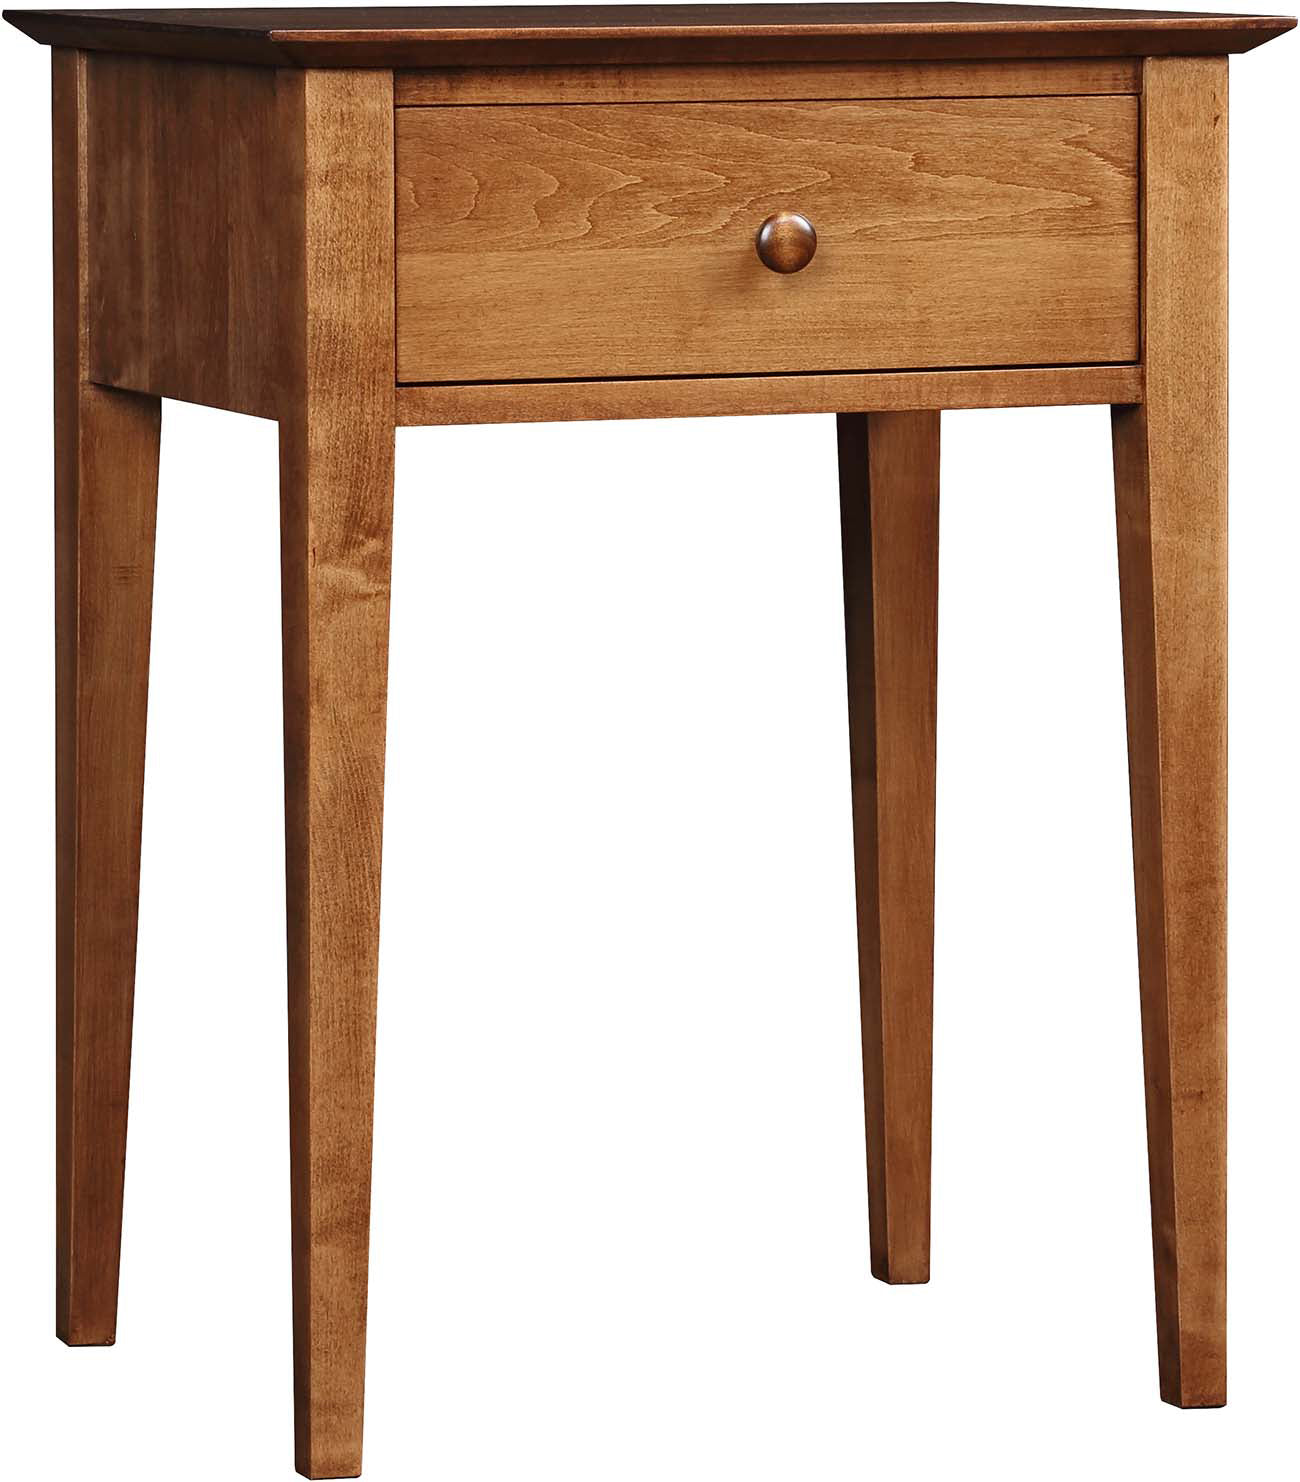 Gable Road One-Drawer Nightstand - Stickley Brand